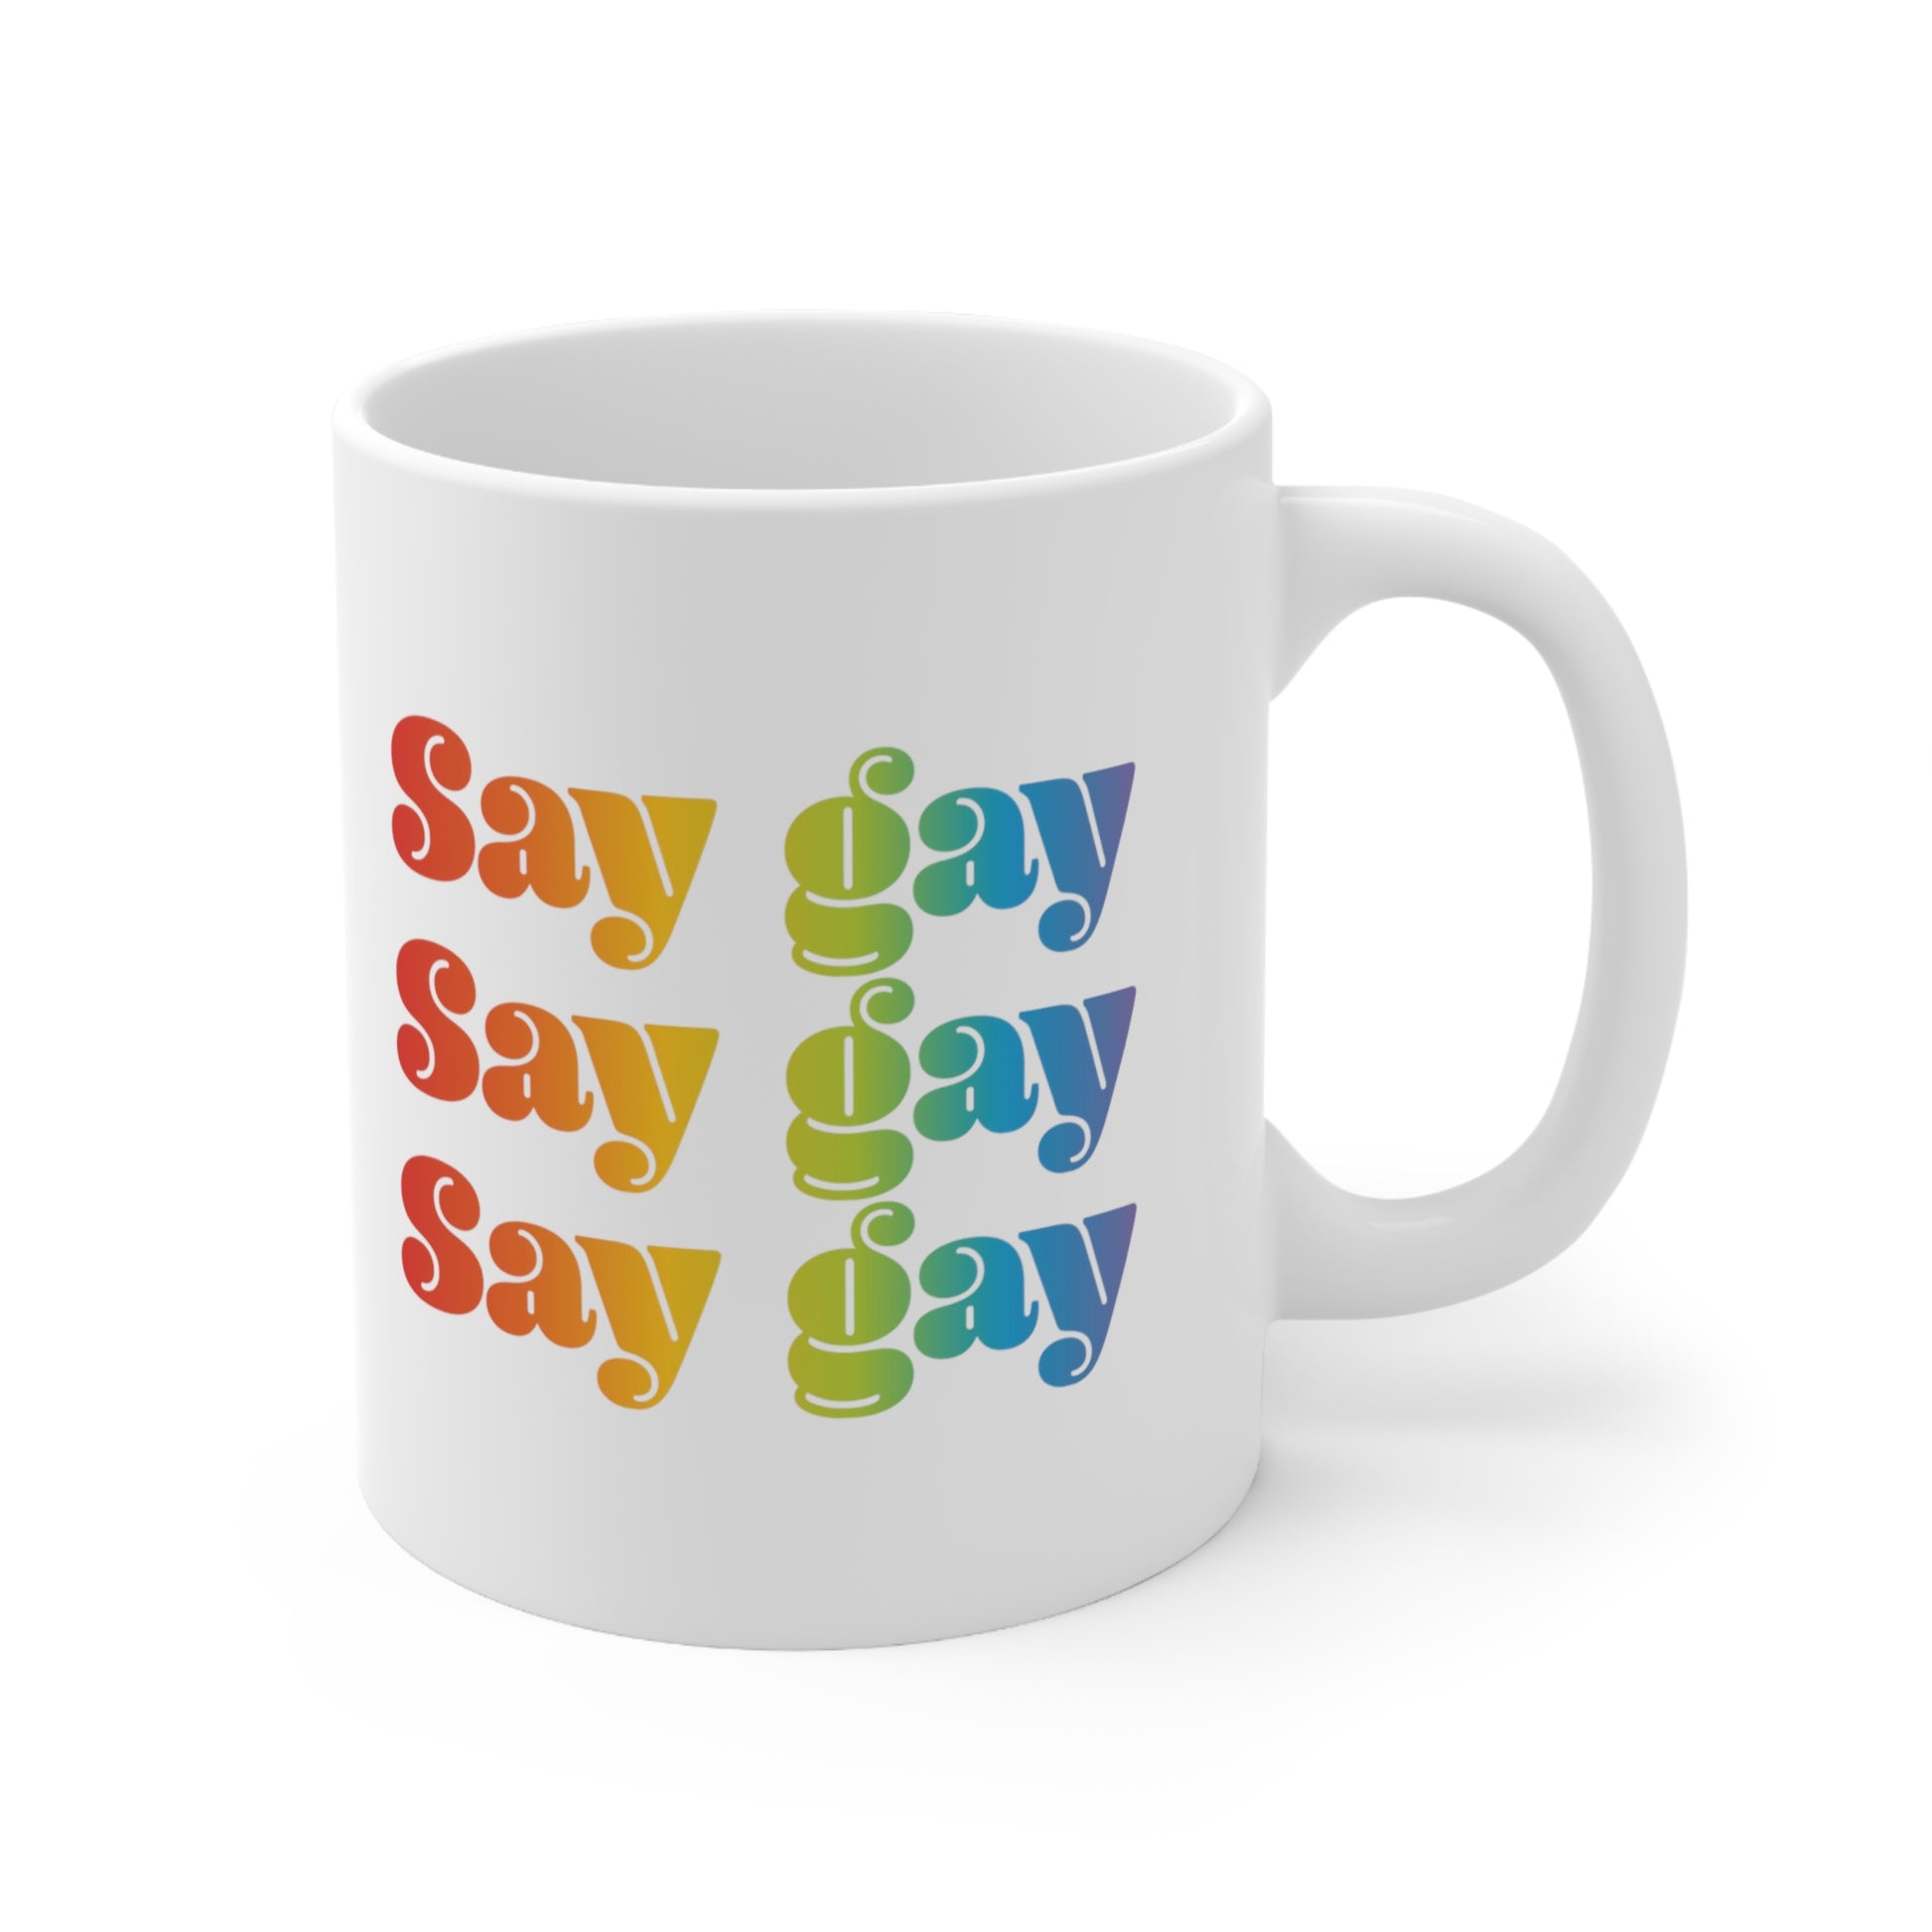 11oz white ceramic mug that reads “Say gay” x3 rows in a thick, rainbow font.